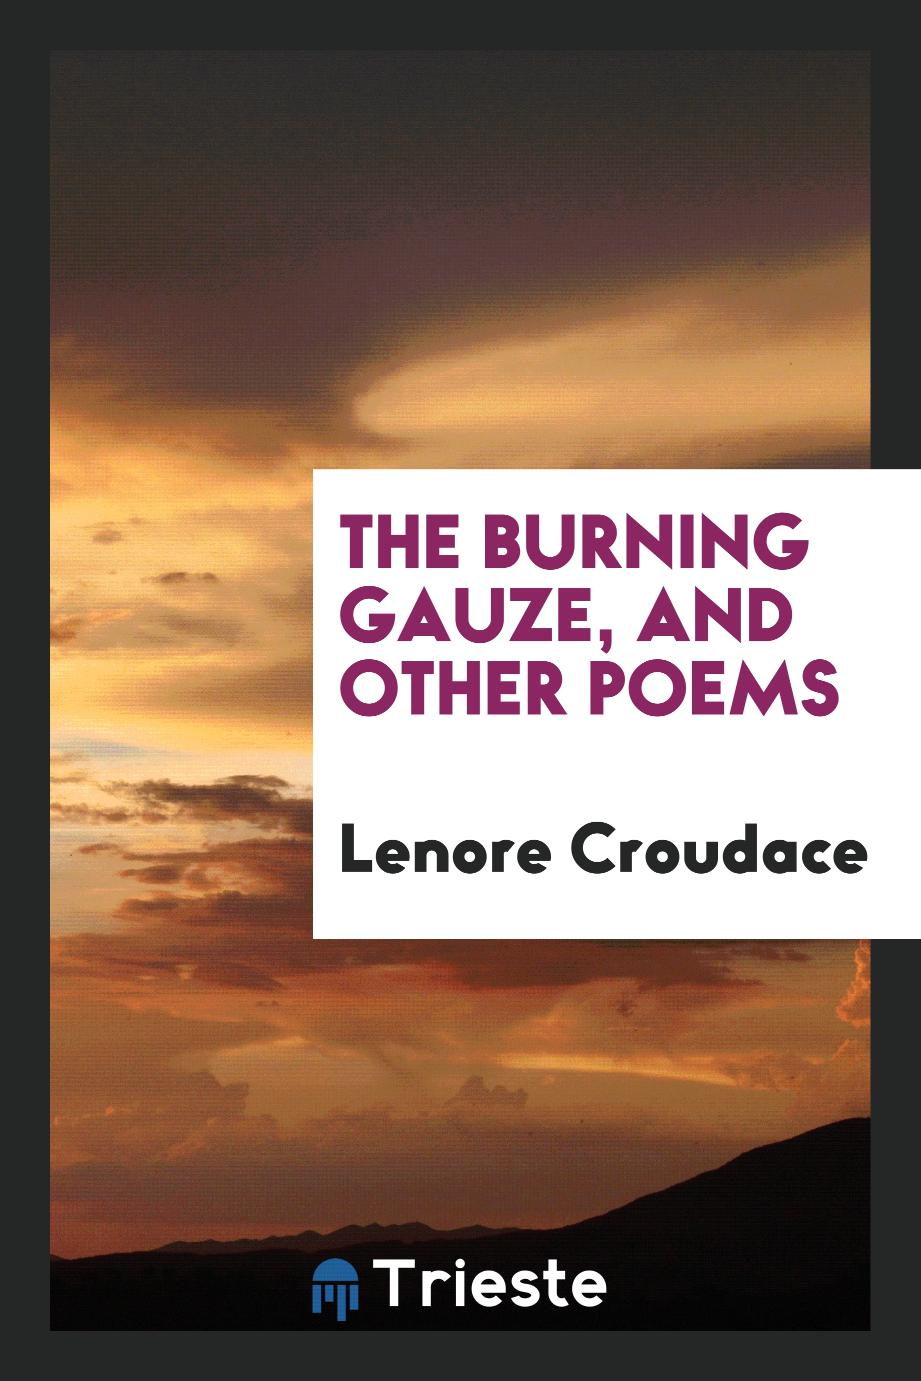 The burning gauze, and other poems